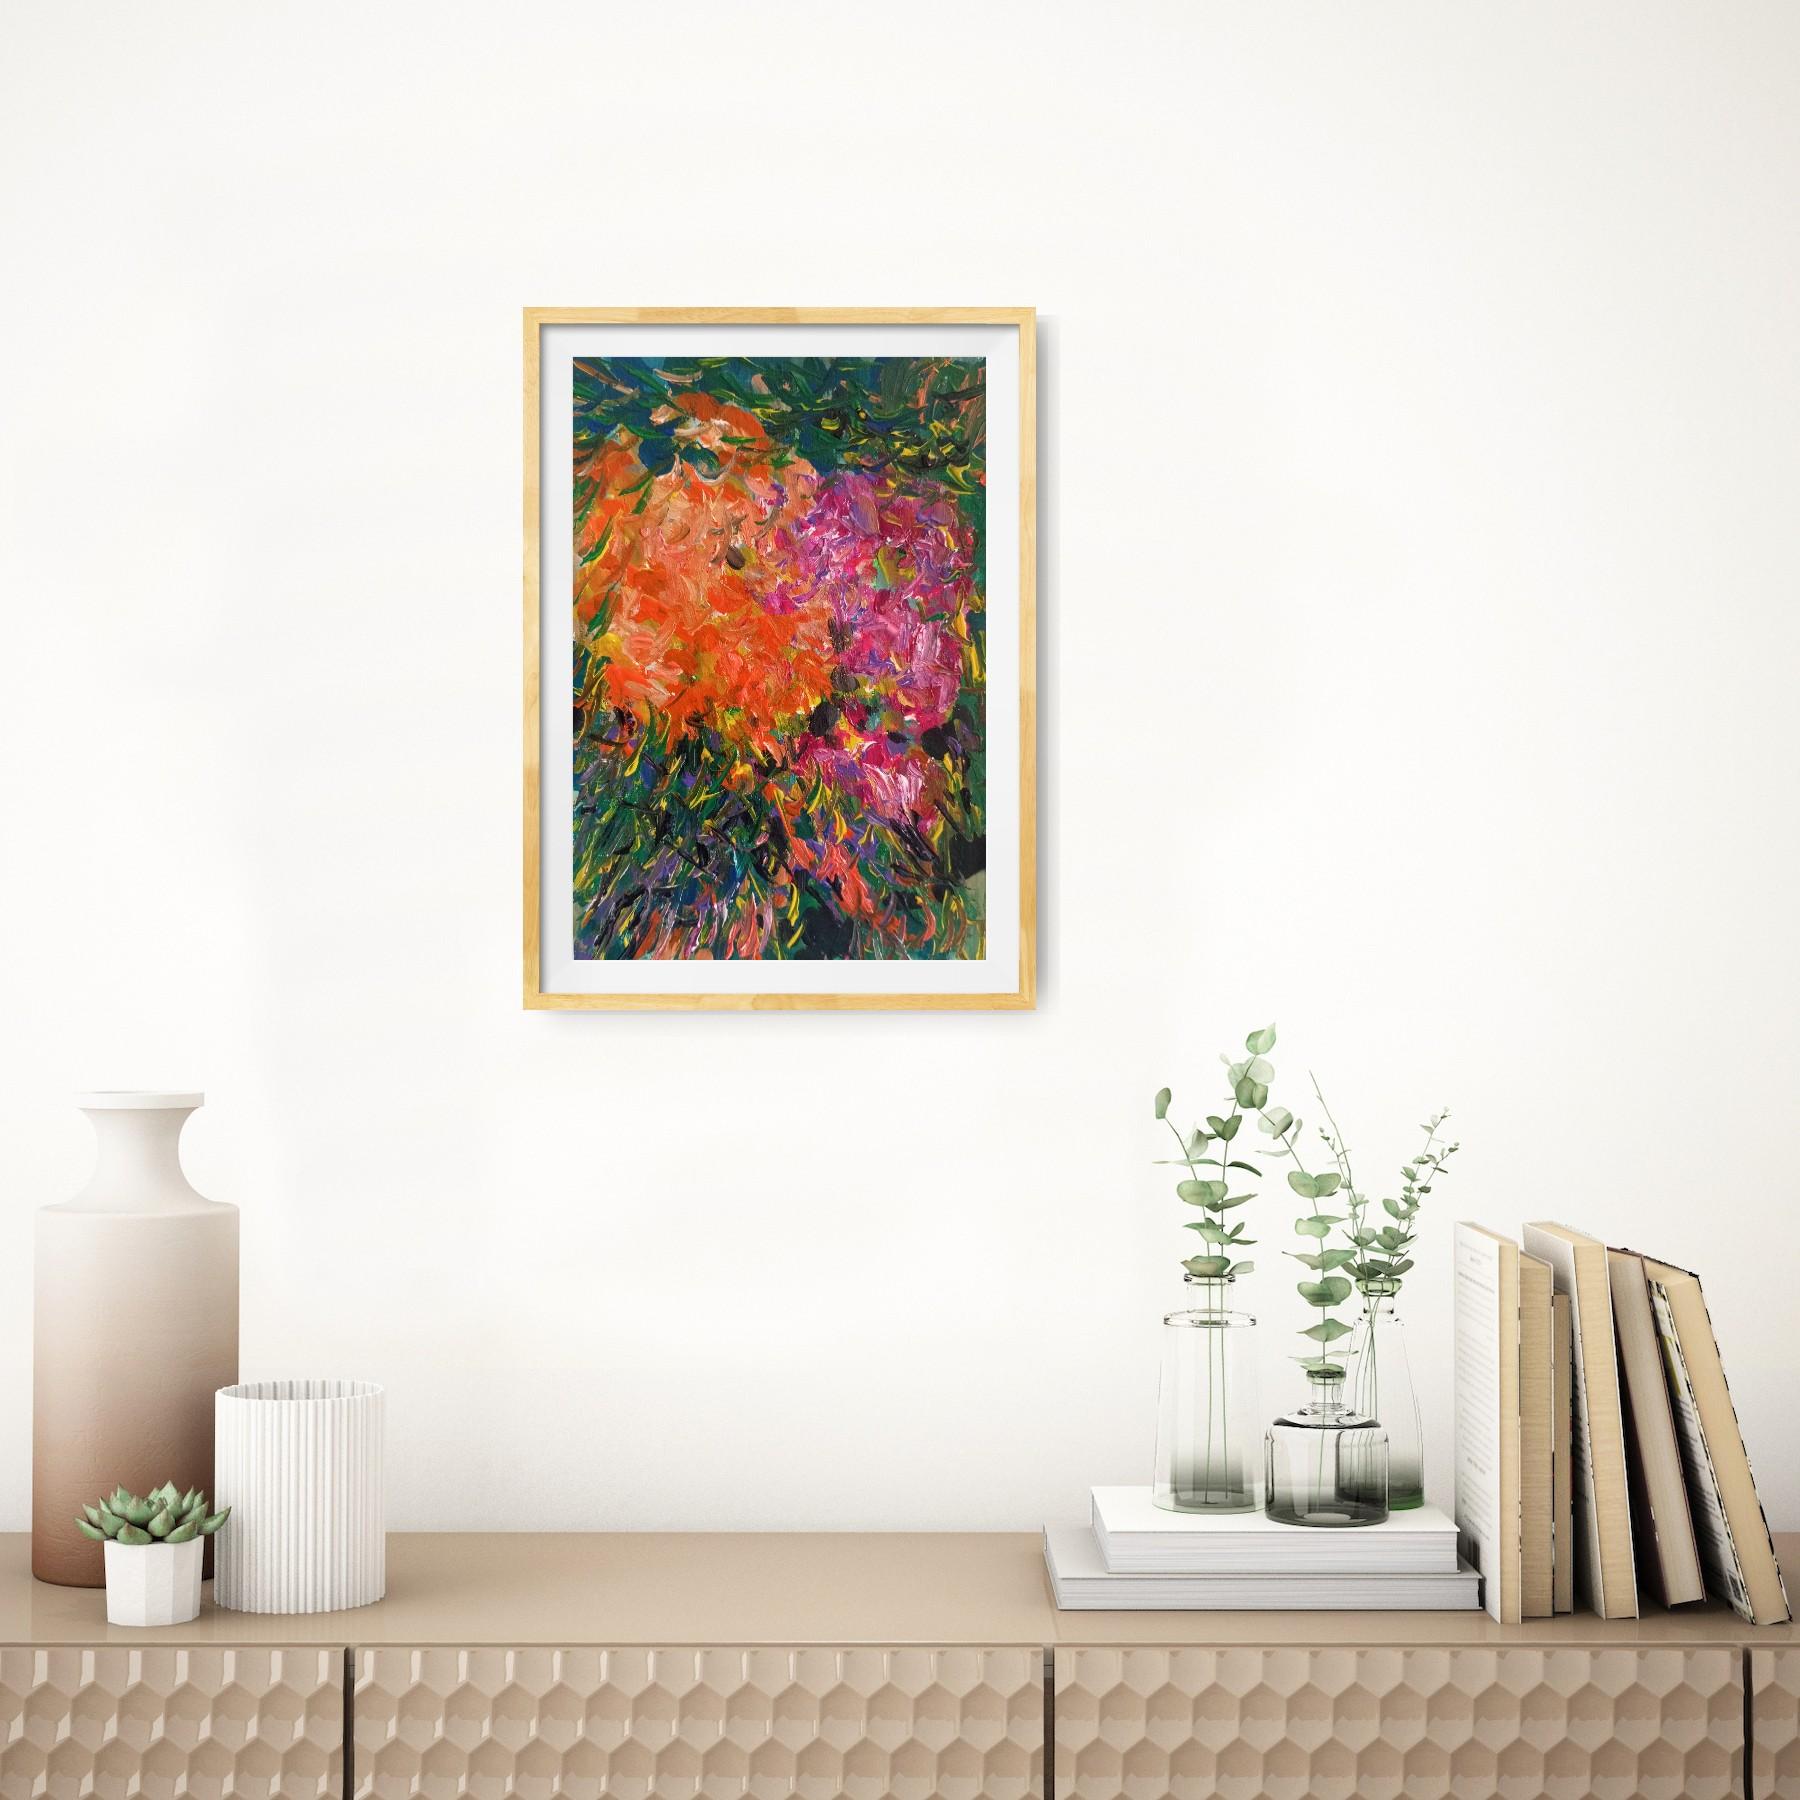 Burst of spring colors  - Painting by Natalya Mougenot 